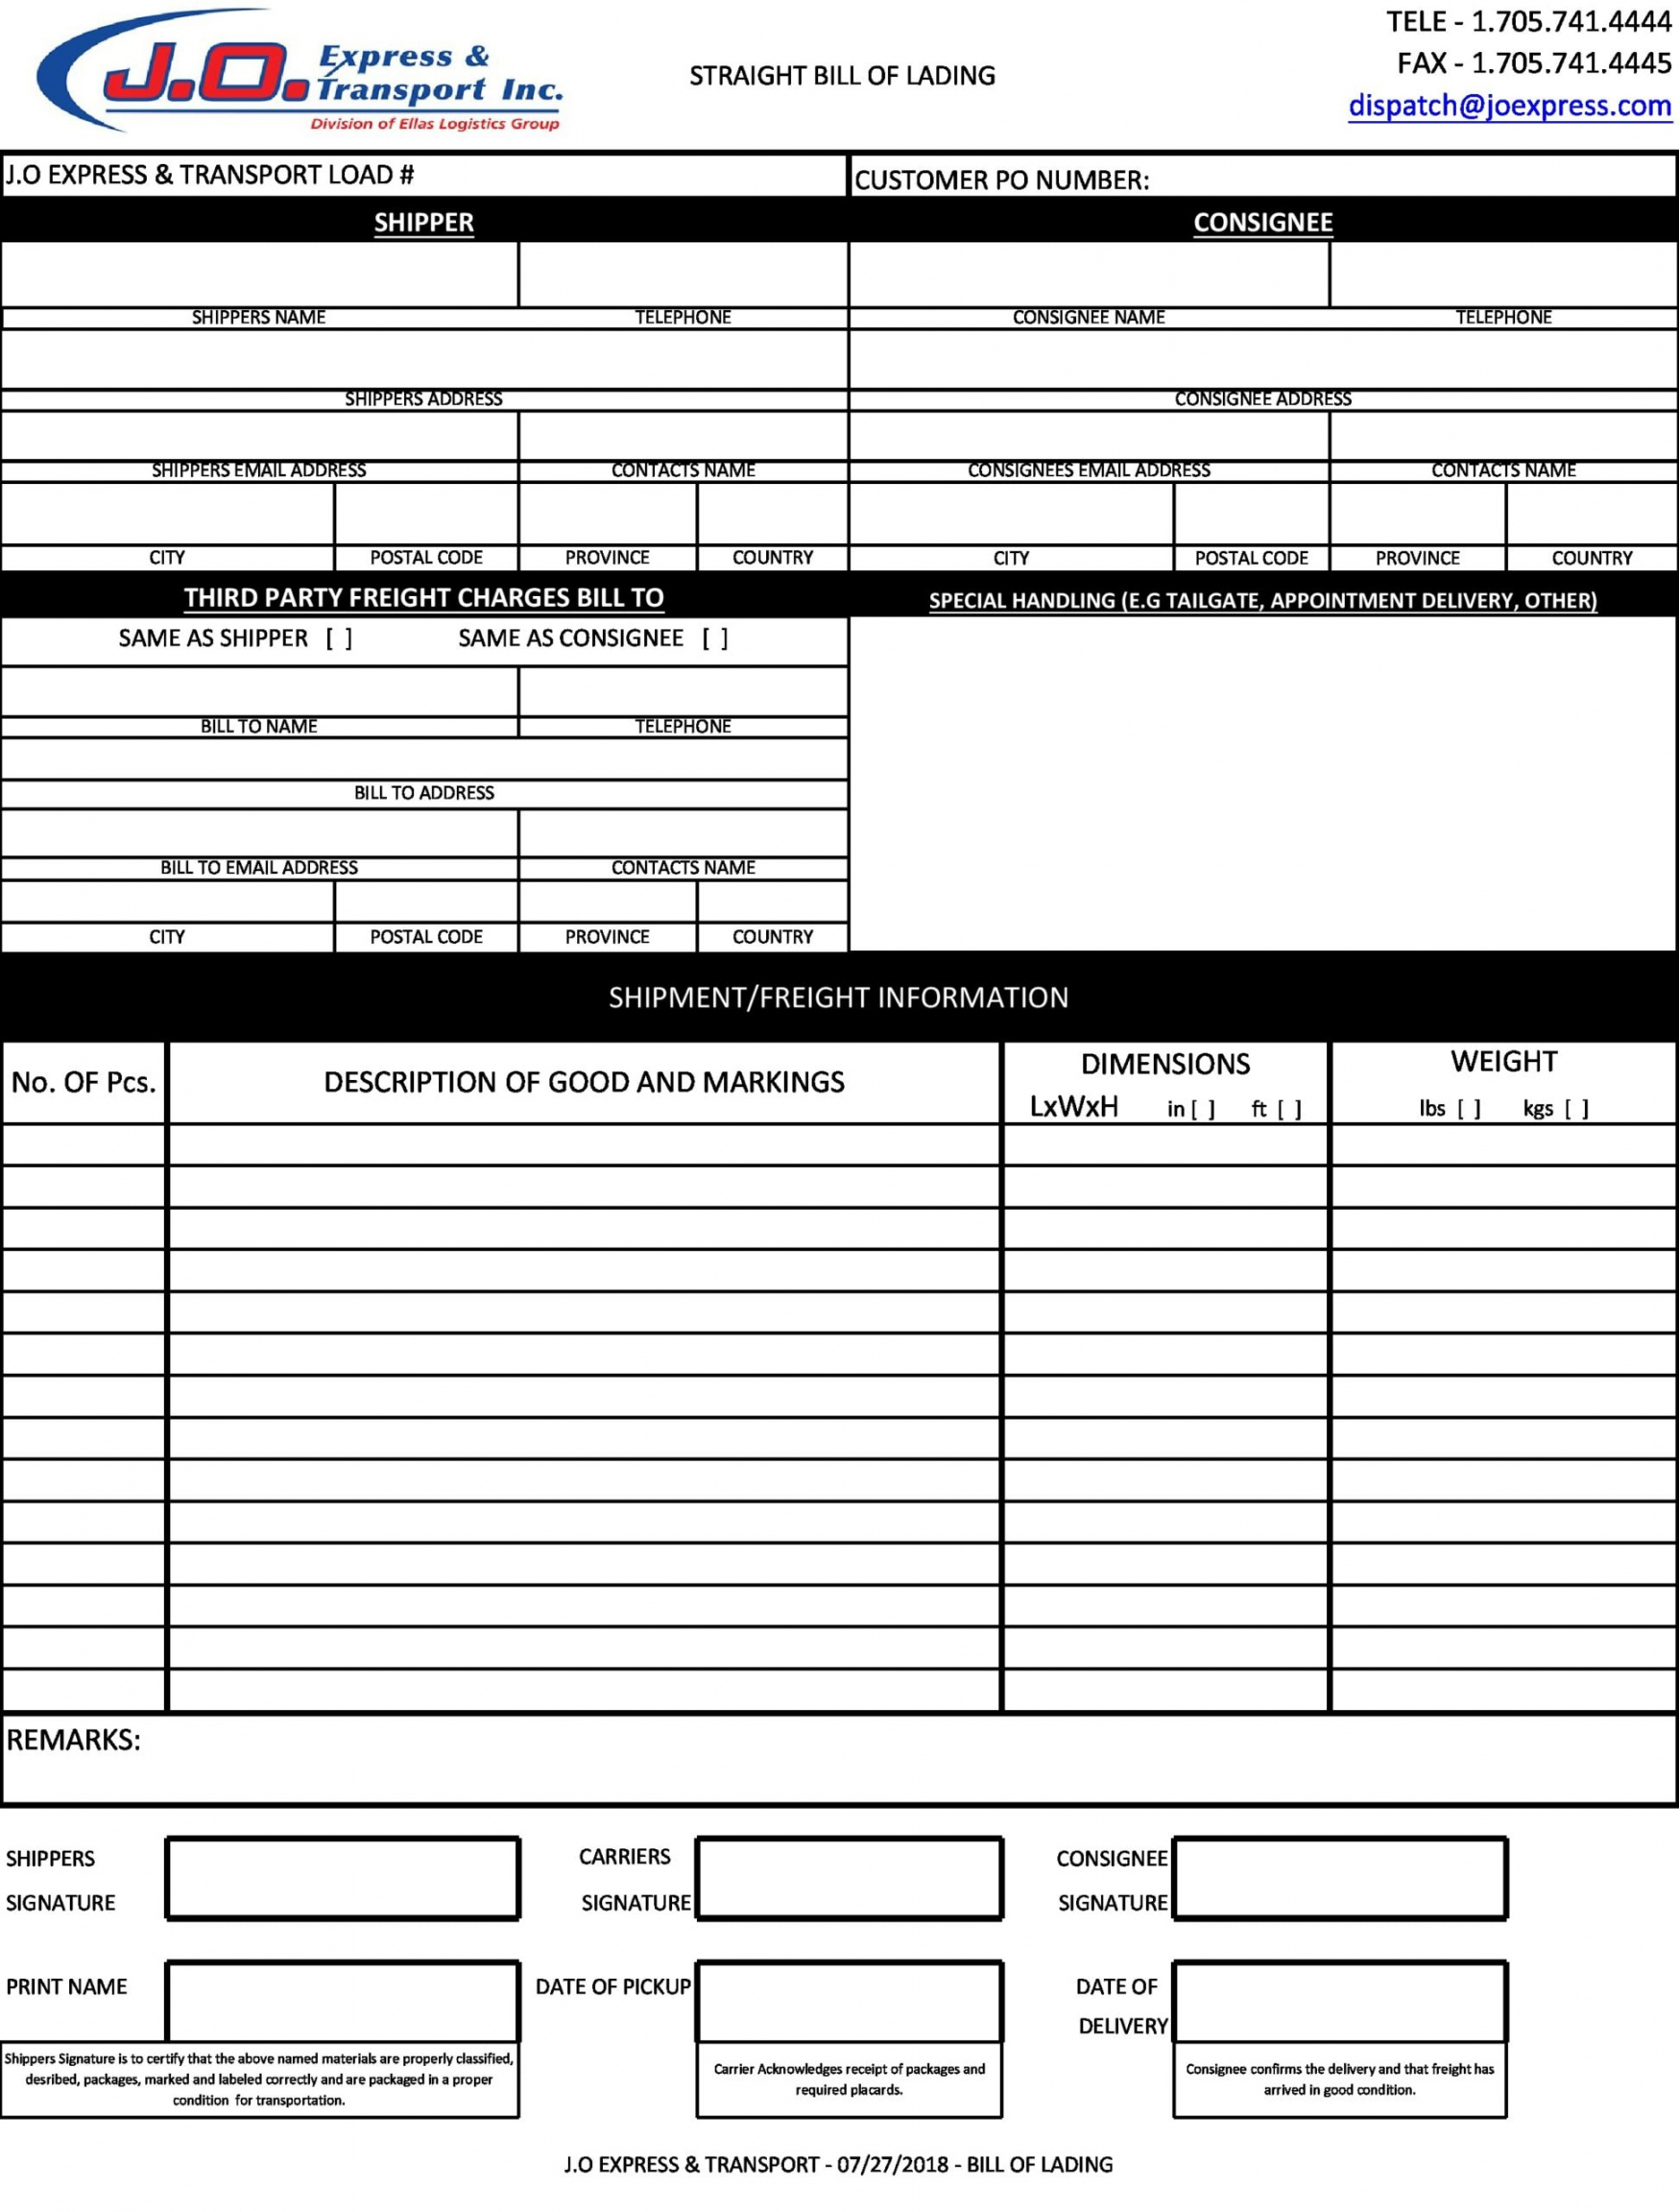 Blank Bill Of Lading Templates (% FREE) - TemplateArchive - FREE Printables - Free Printable Bill Of Lading